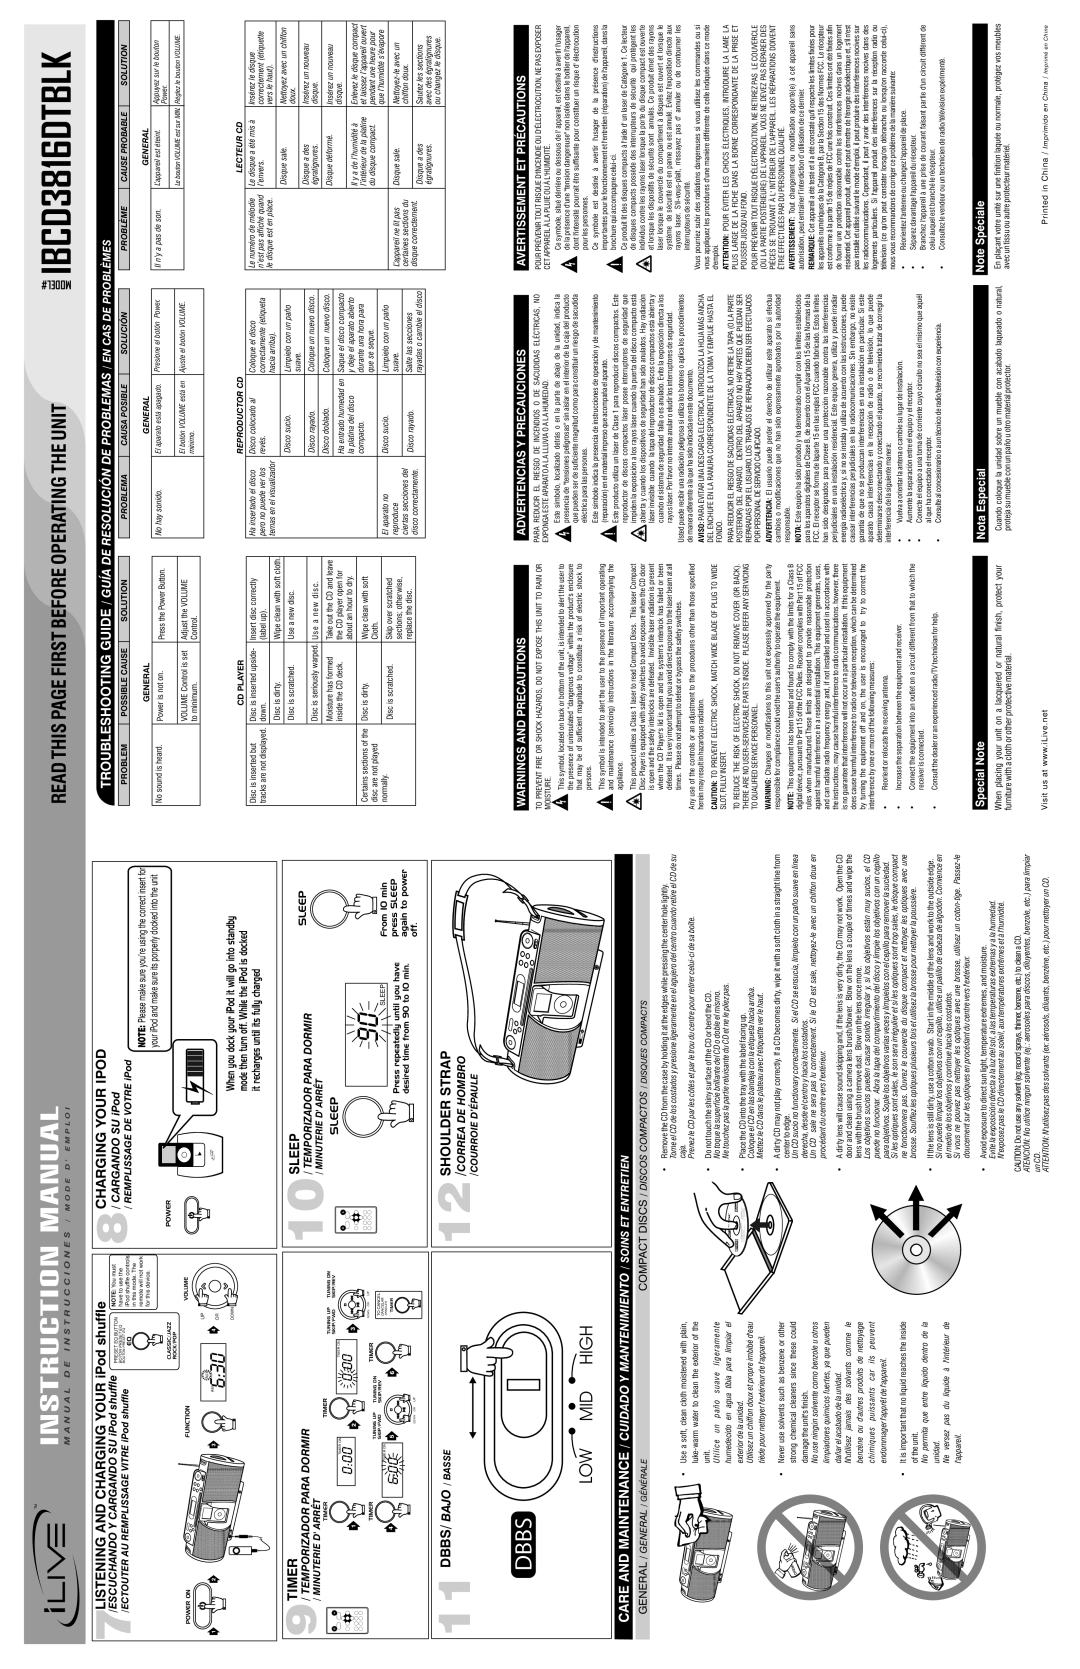 iLive instruction manual 9TIMER, 12SHOULDER STRAP, MODEL# IBCD3816DTBLK, Read This Page First Before Operating The Unit 